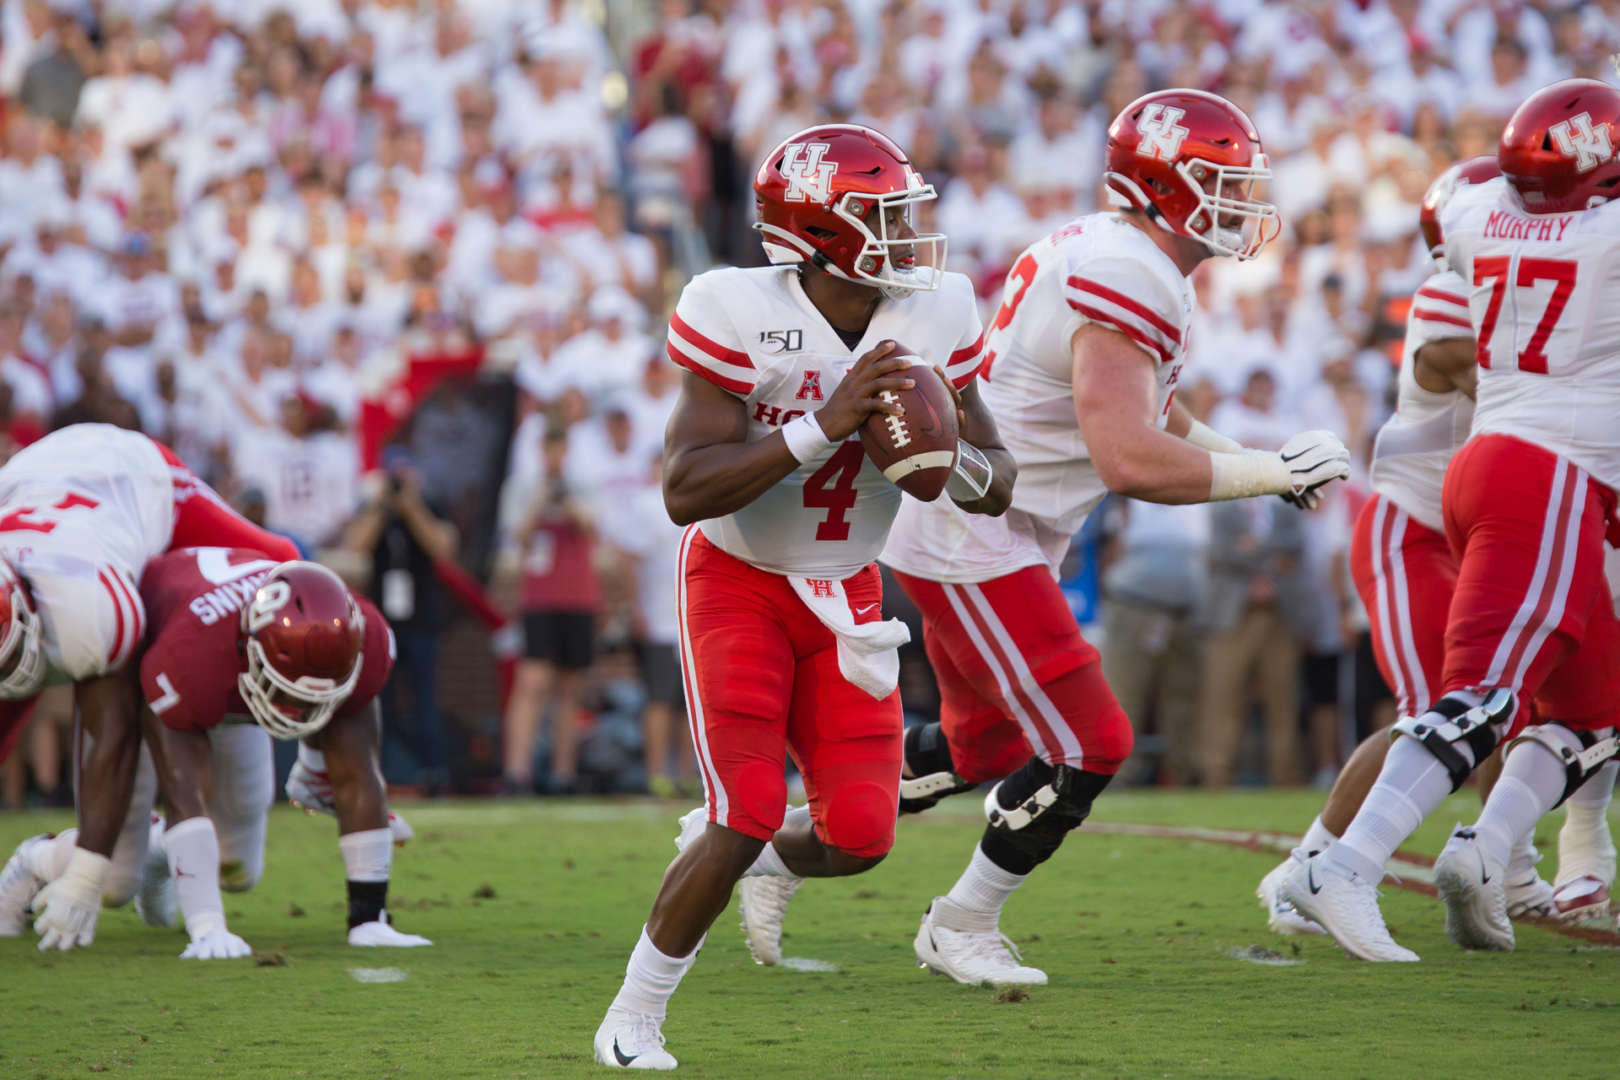 Senior quarterback D'Eriq King threw for 663 yards and six touchdowns in four games in 2019 before redshirting. | Trevor Nolley/The Cougar